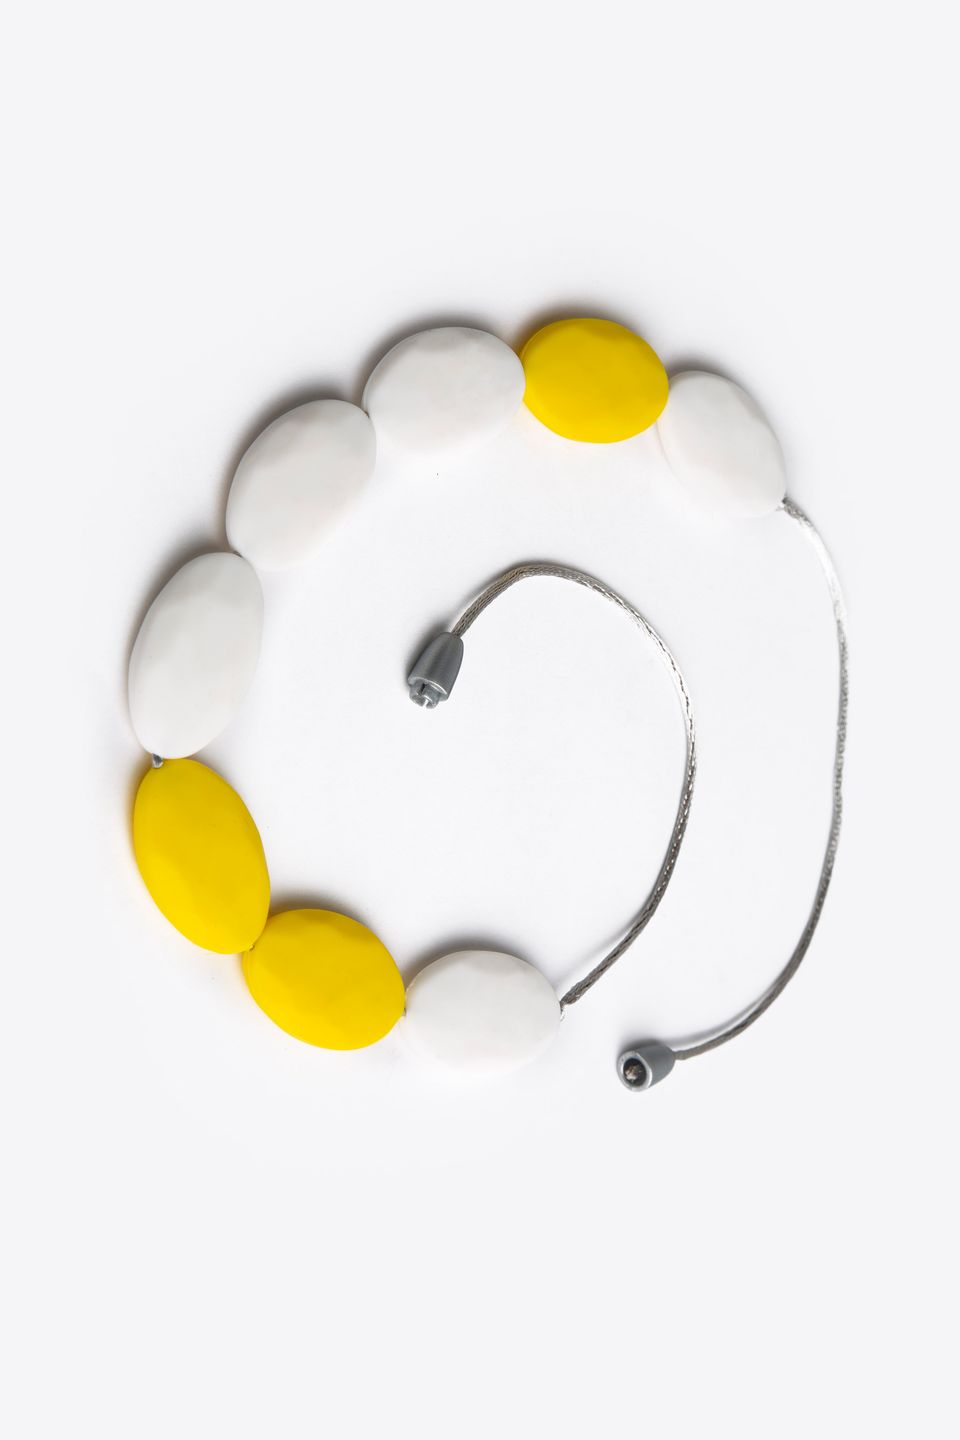 Charismomic Snow Canary Teething Jewelry - For Moms to Wear